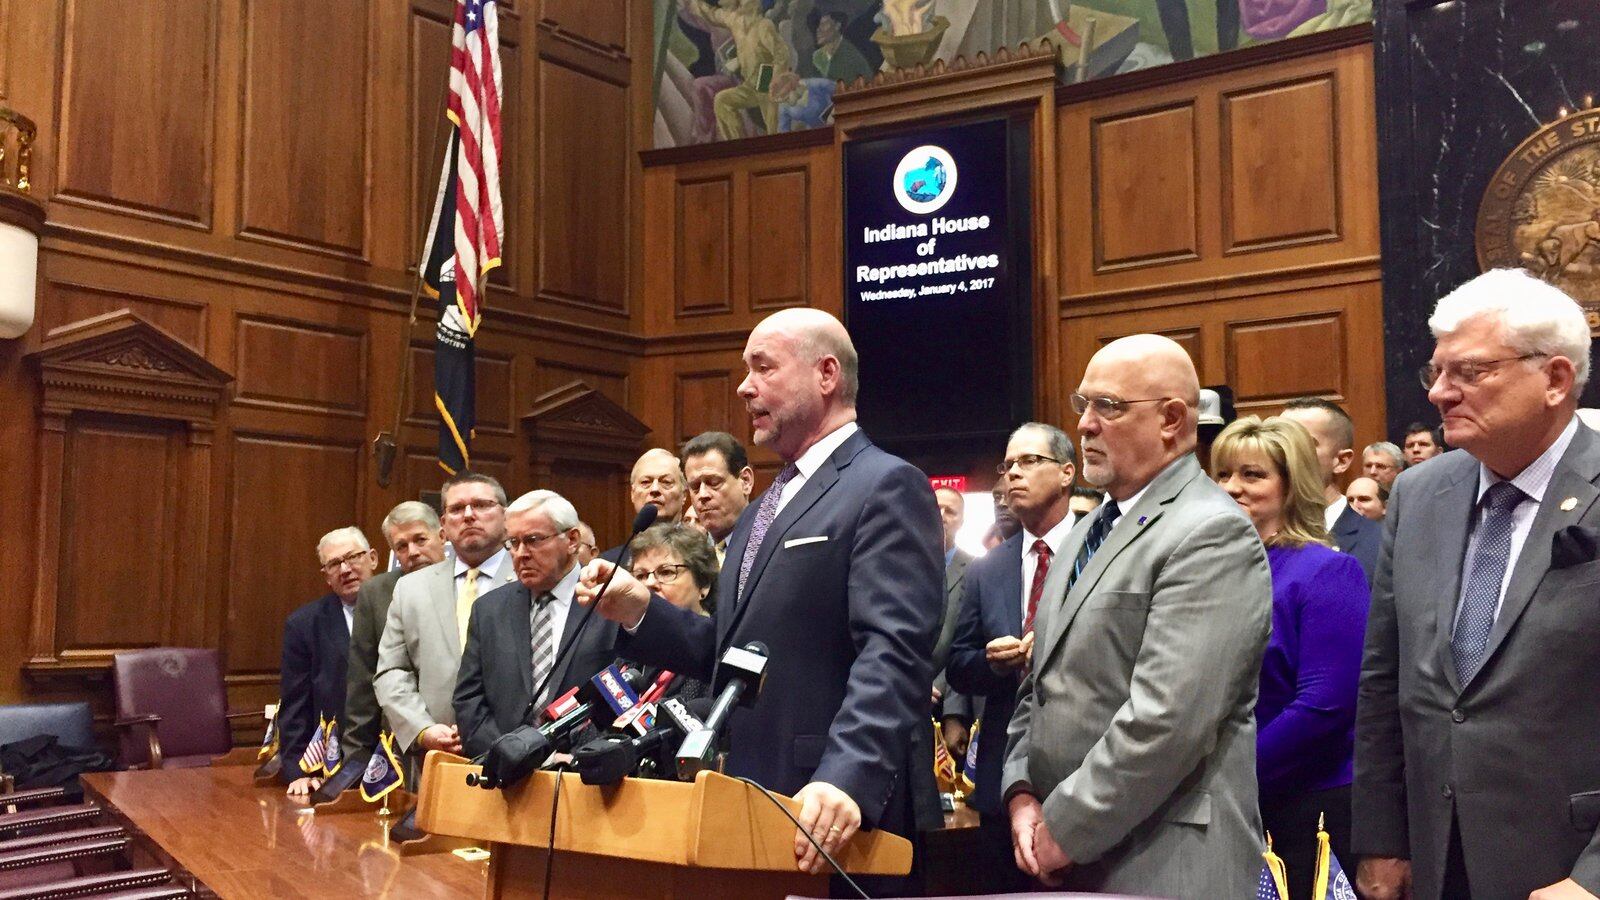 House Speaker Brian Bosma presents legislative priorities for Indiana House Republicans on Wednesday.